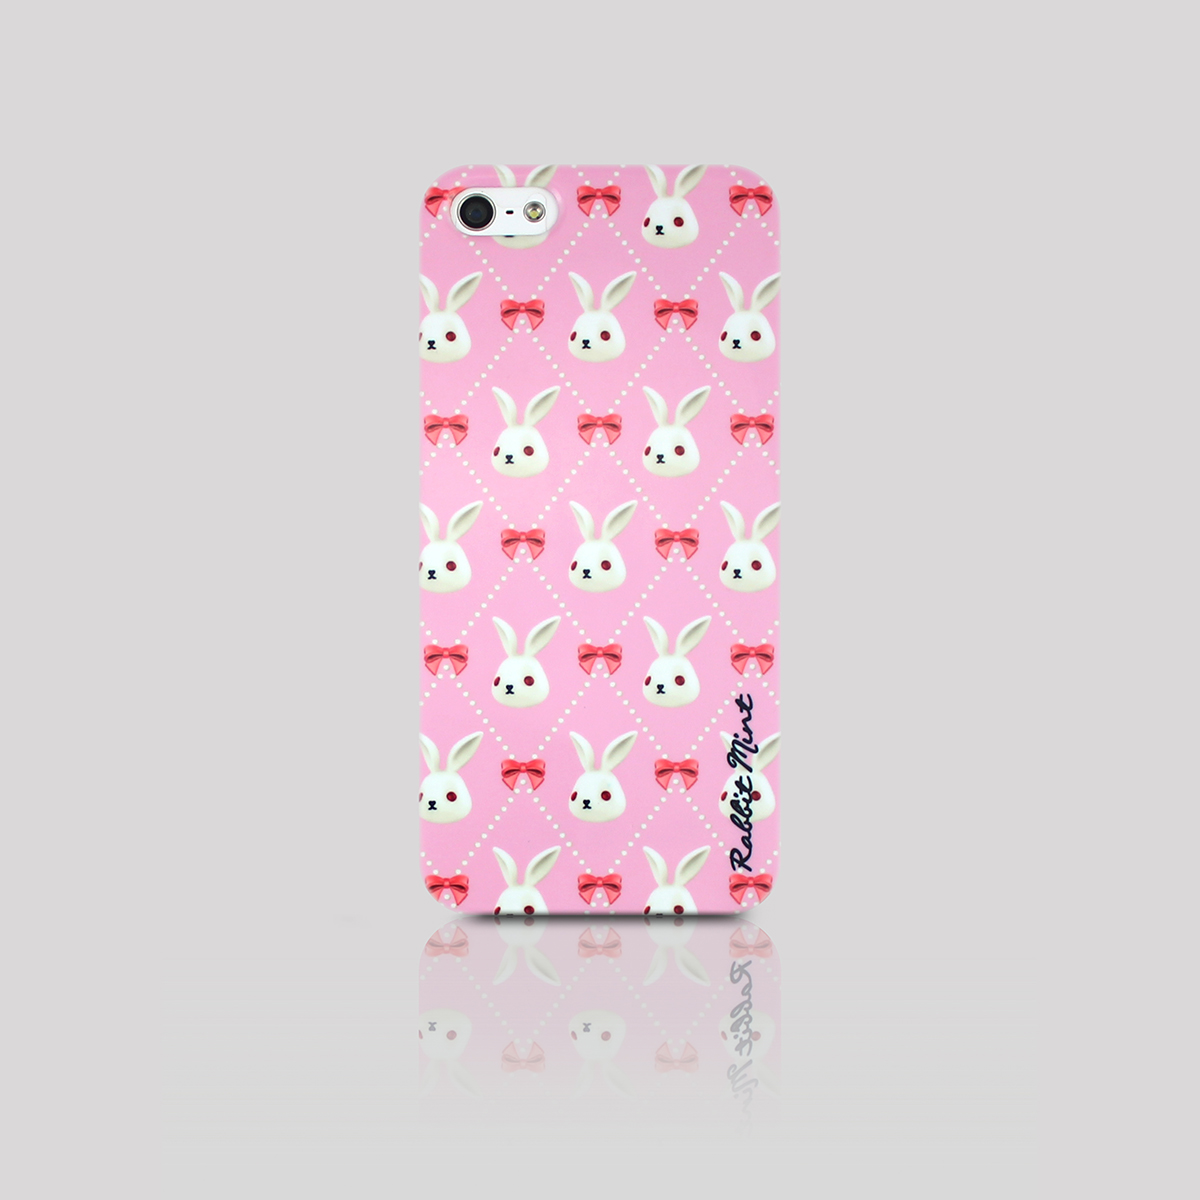 Iphone 5 / 5s Case - Merry Boo & Pink Ribbon (m0013-ip5)